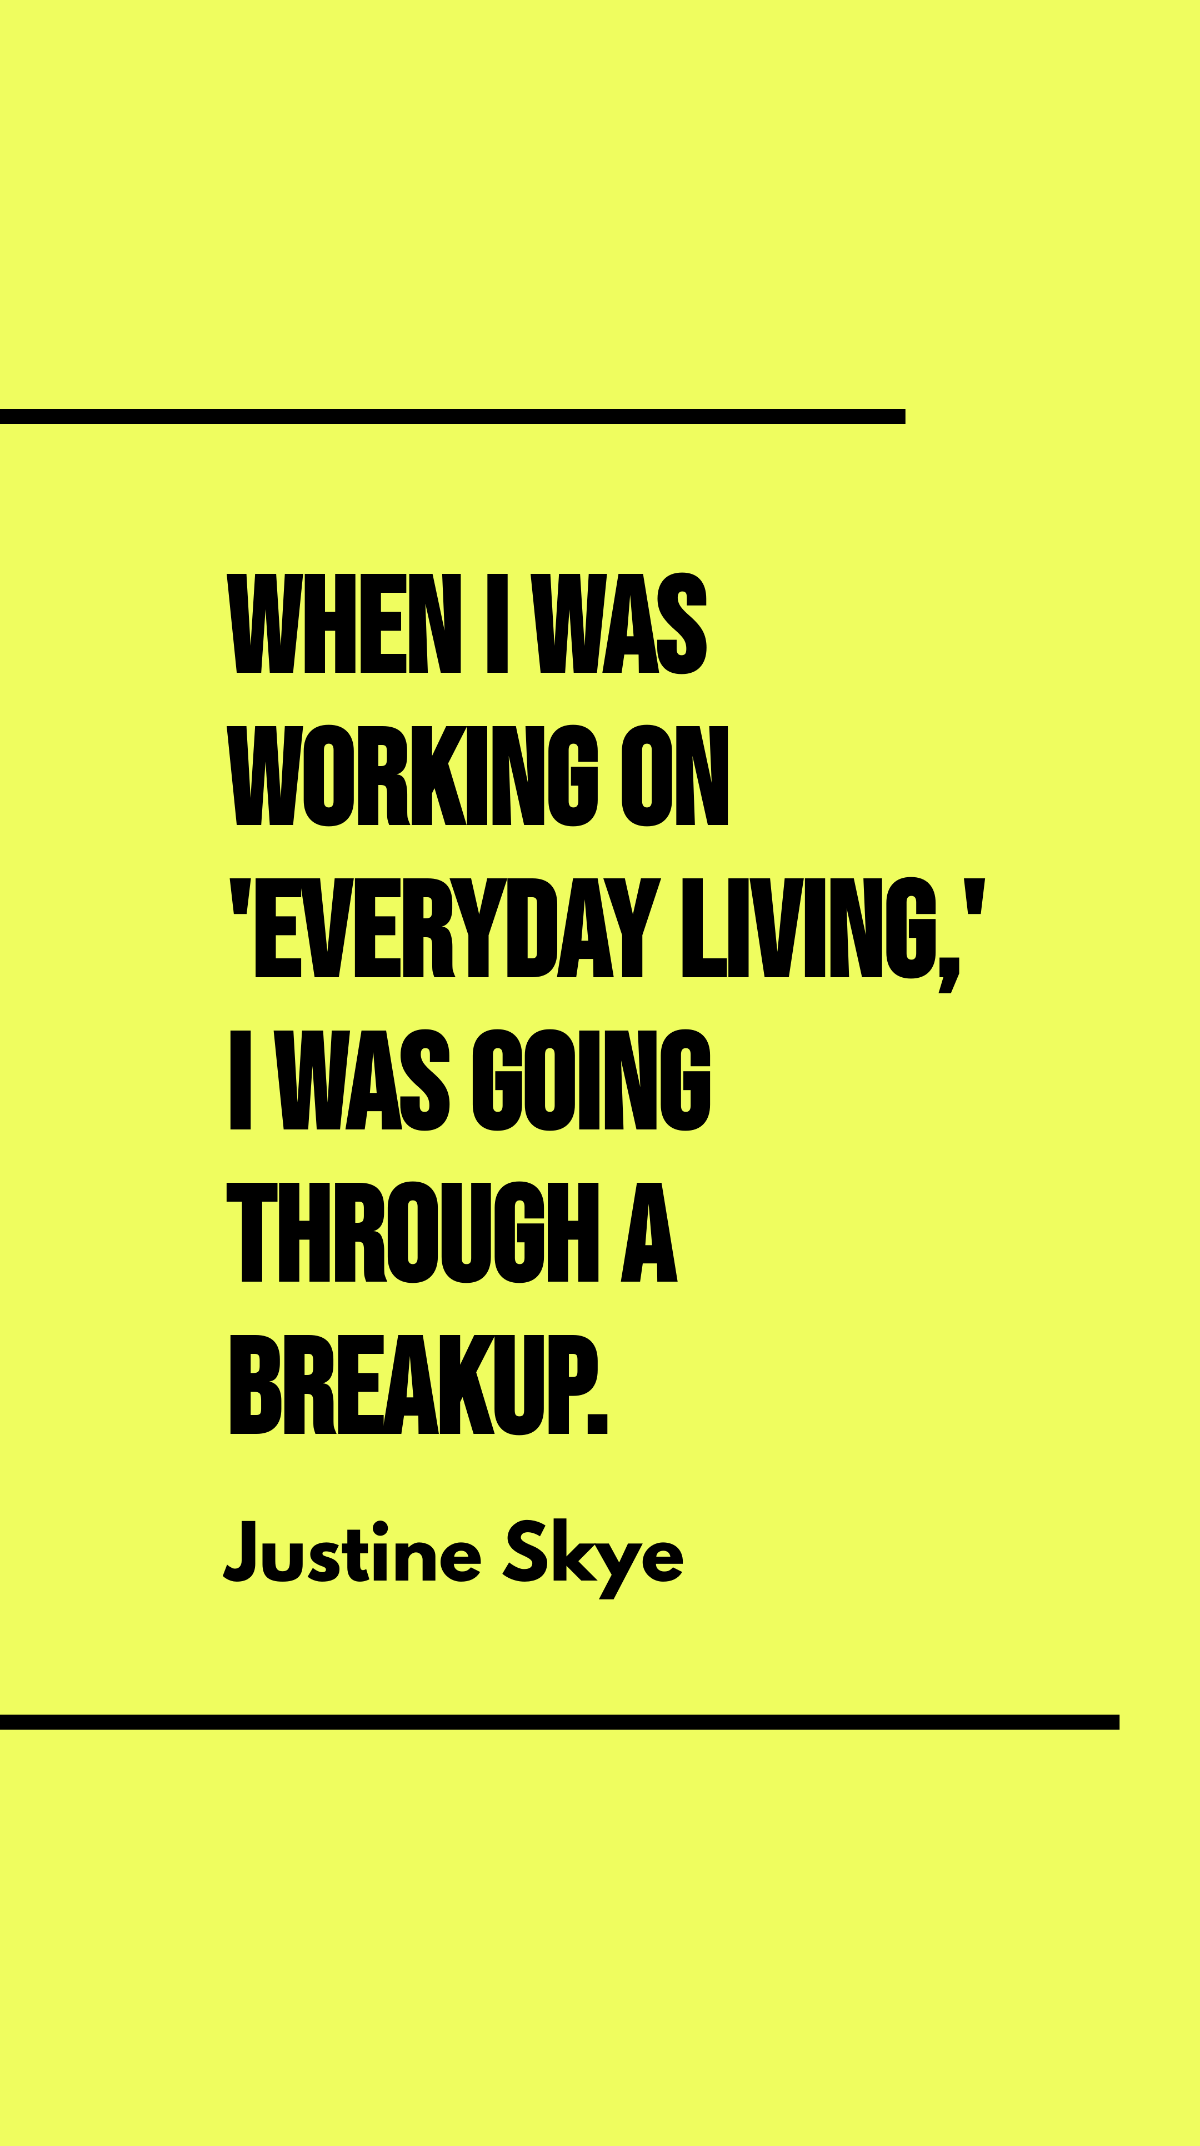 Justine Skye - When I was working on 'Everyday Living,' I was going through a breakup. Template